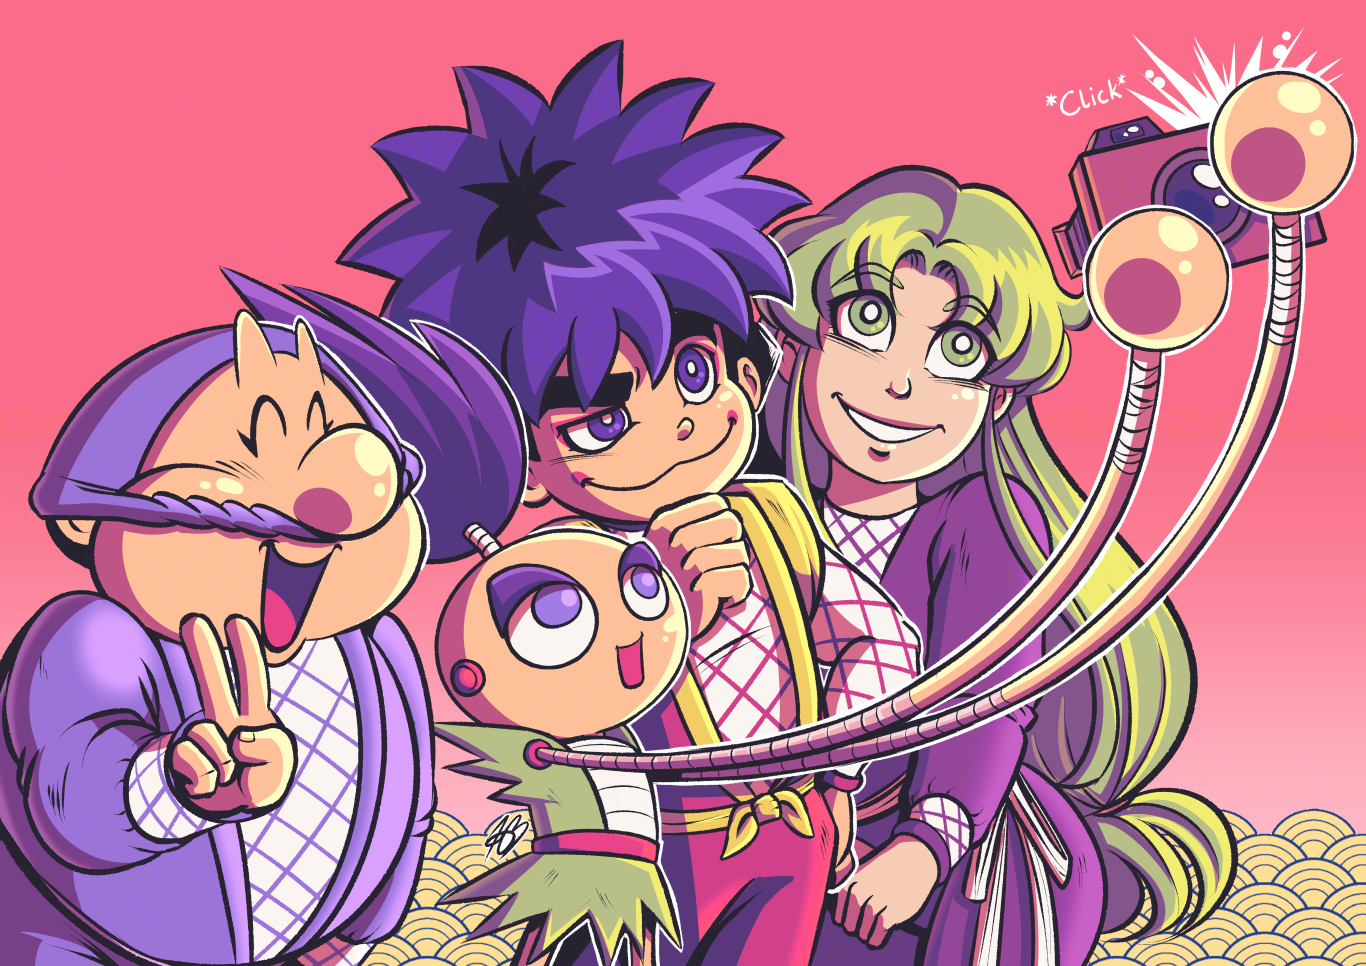 Full colour digital illustration of the 4 main characters from Ganbare Goemon (Mystical Ninja). From left to right: Ebisumaru, Sasuke, Goemon and Yae. The group are bunched together taking a selfie, with Sasuke's robot arms extending up high, holding the archaic camera towards themselves. All are smiling, and Ebisumaru is making a peace sign. The background is peachy-pink and yellow.